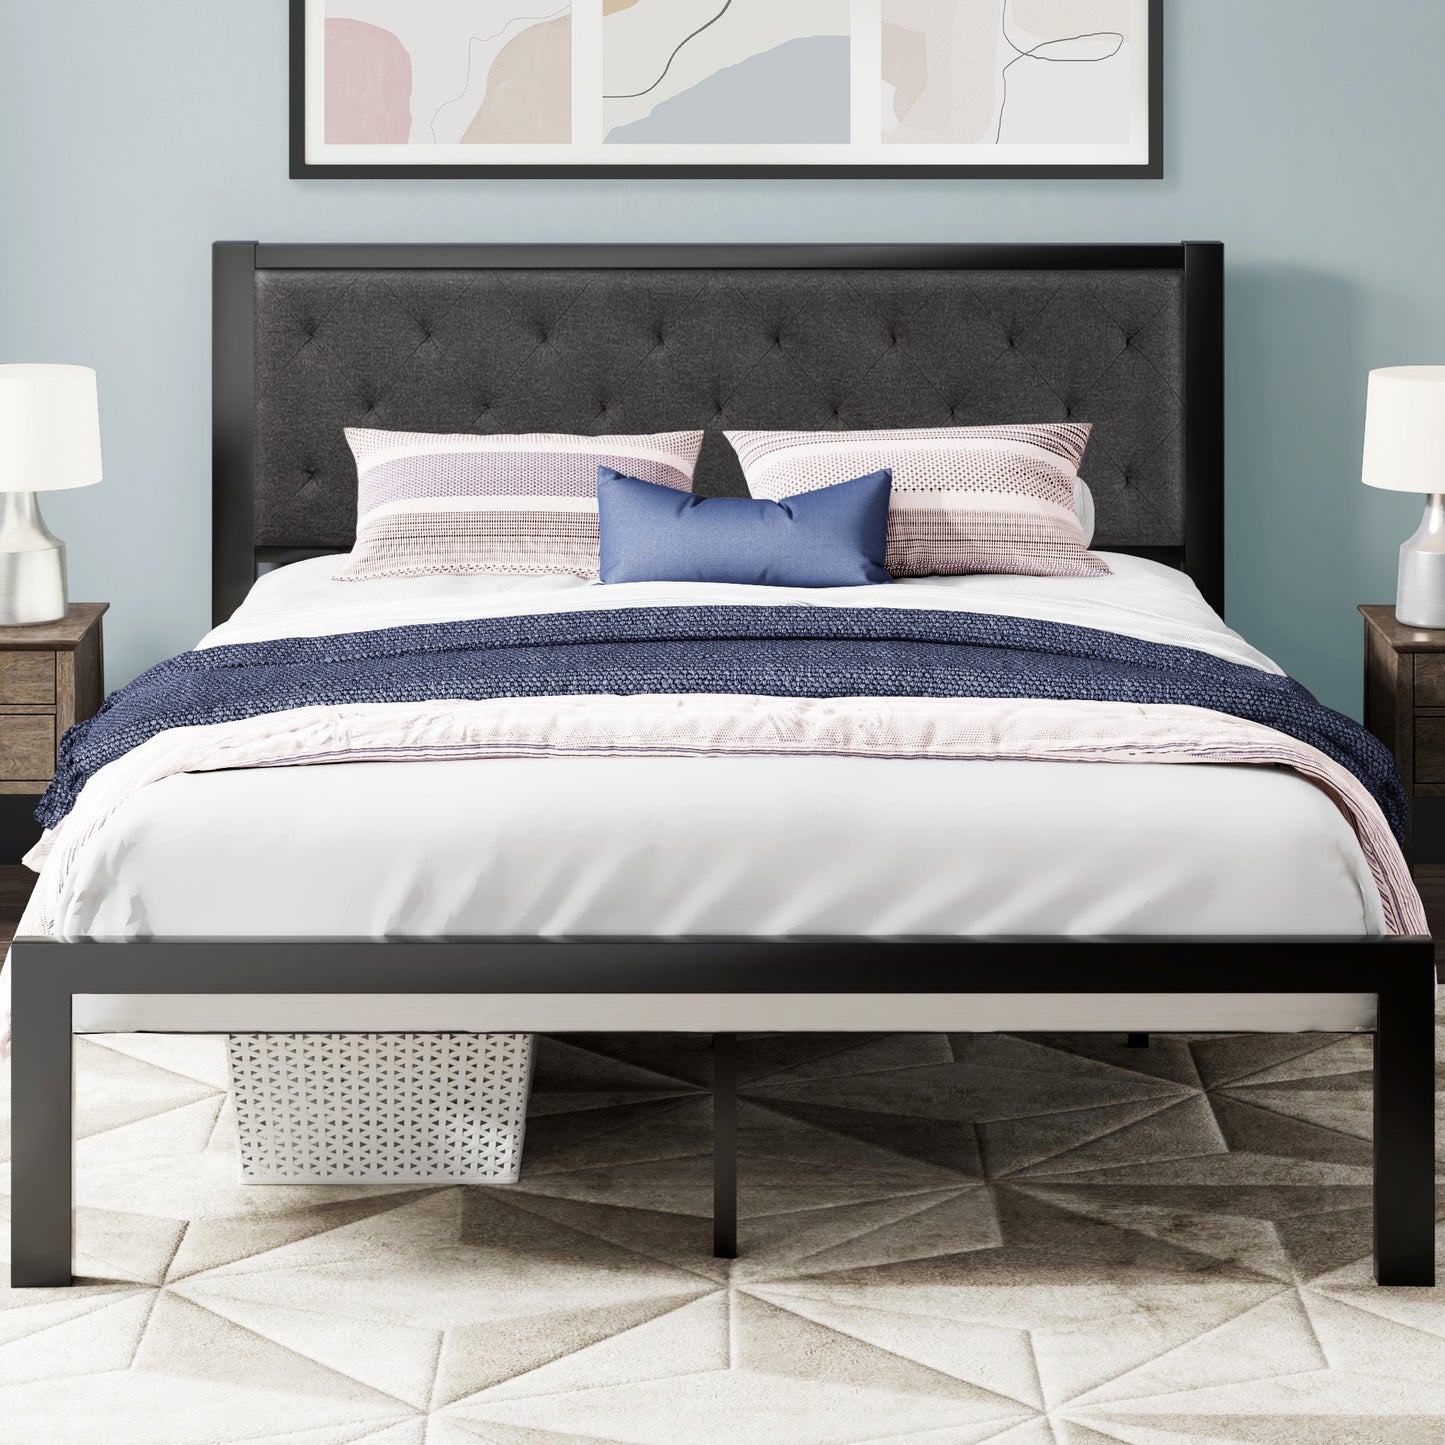 Allewie Metal Platform Bed frame with Tufted Diamond Stitched Fabric Headboard, Strong Steal Slats Support